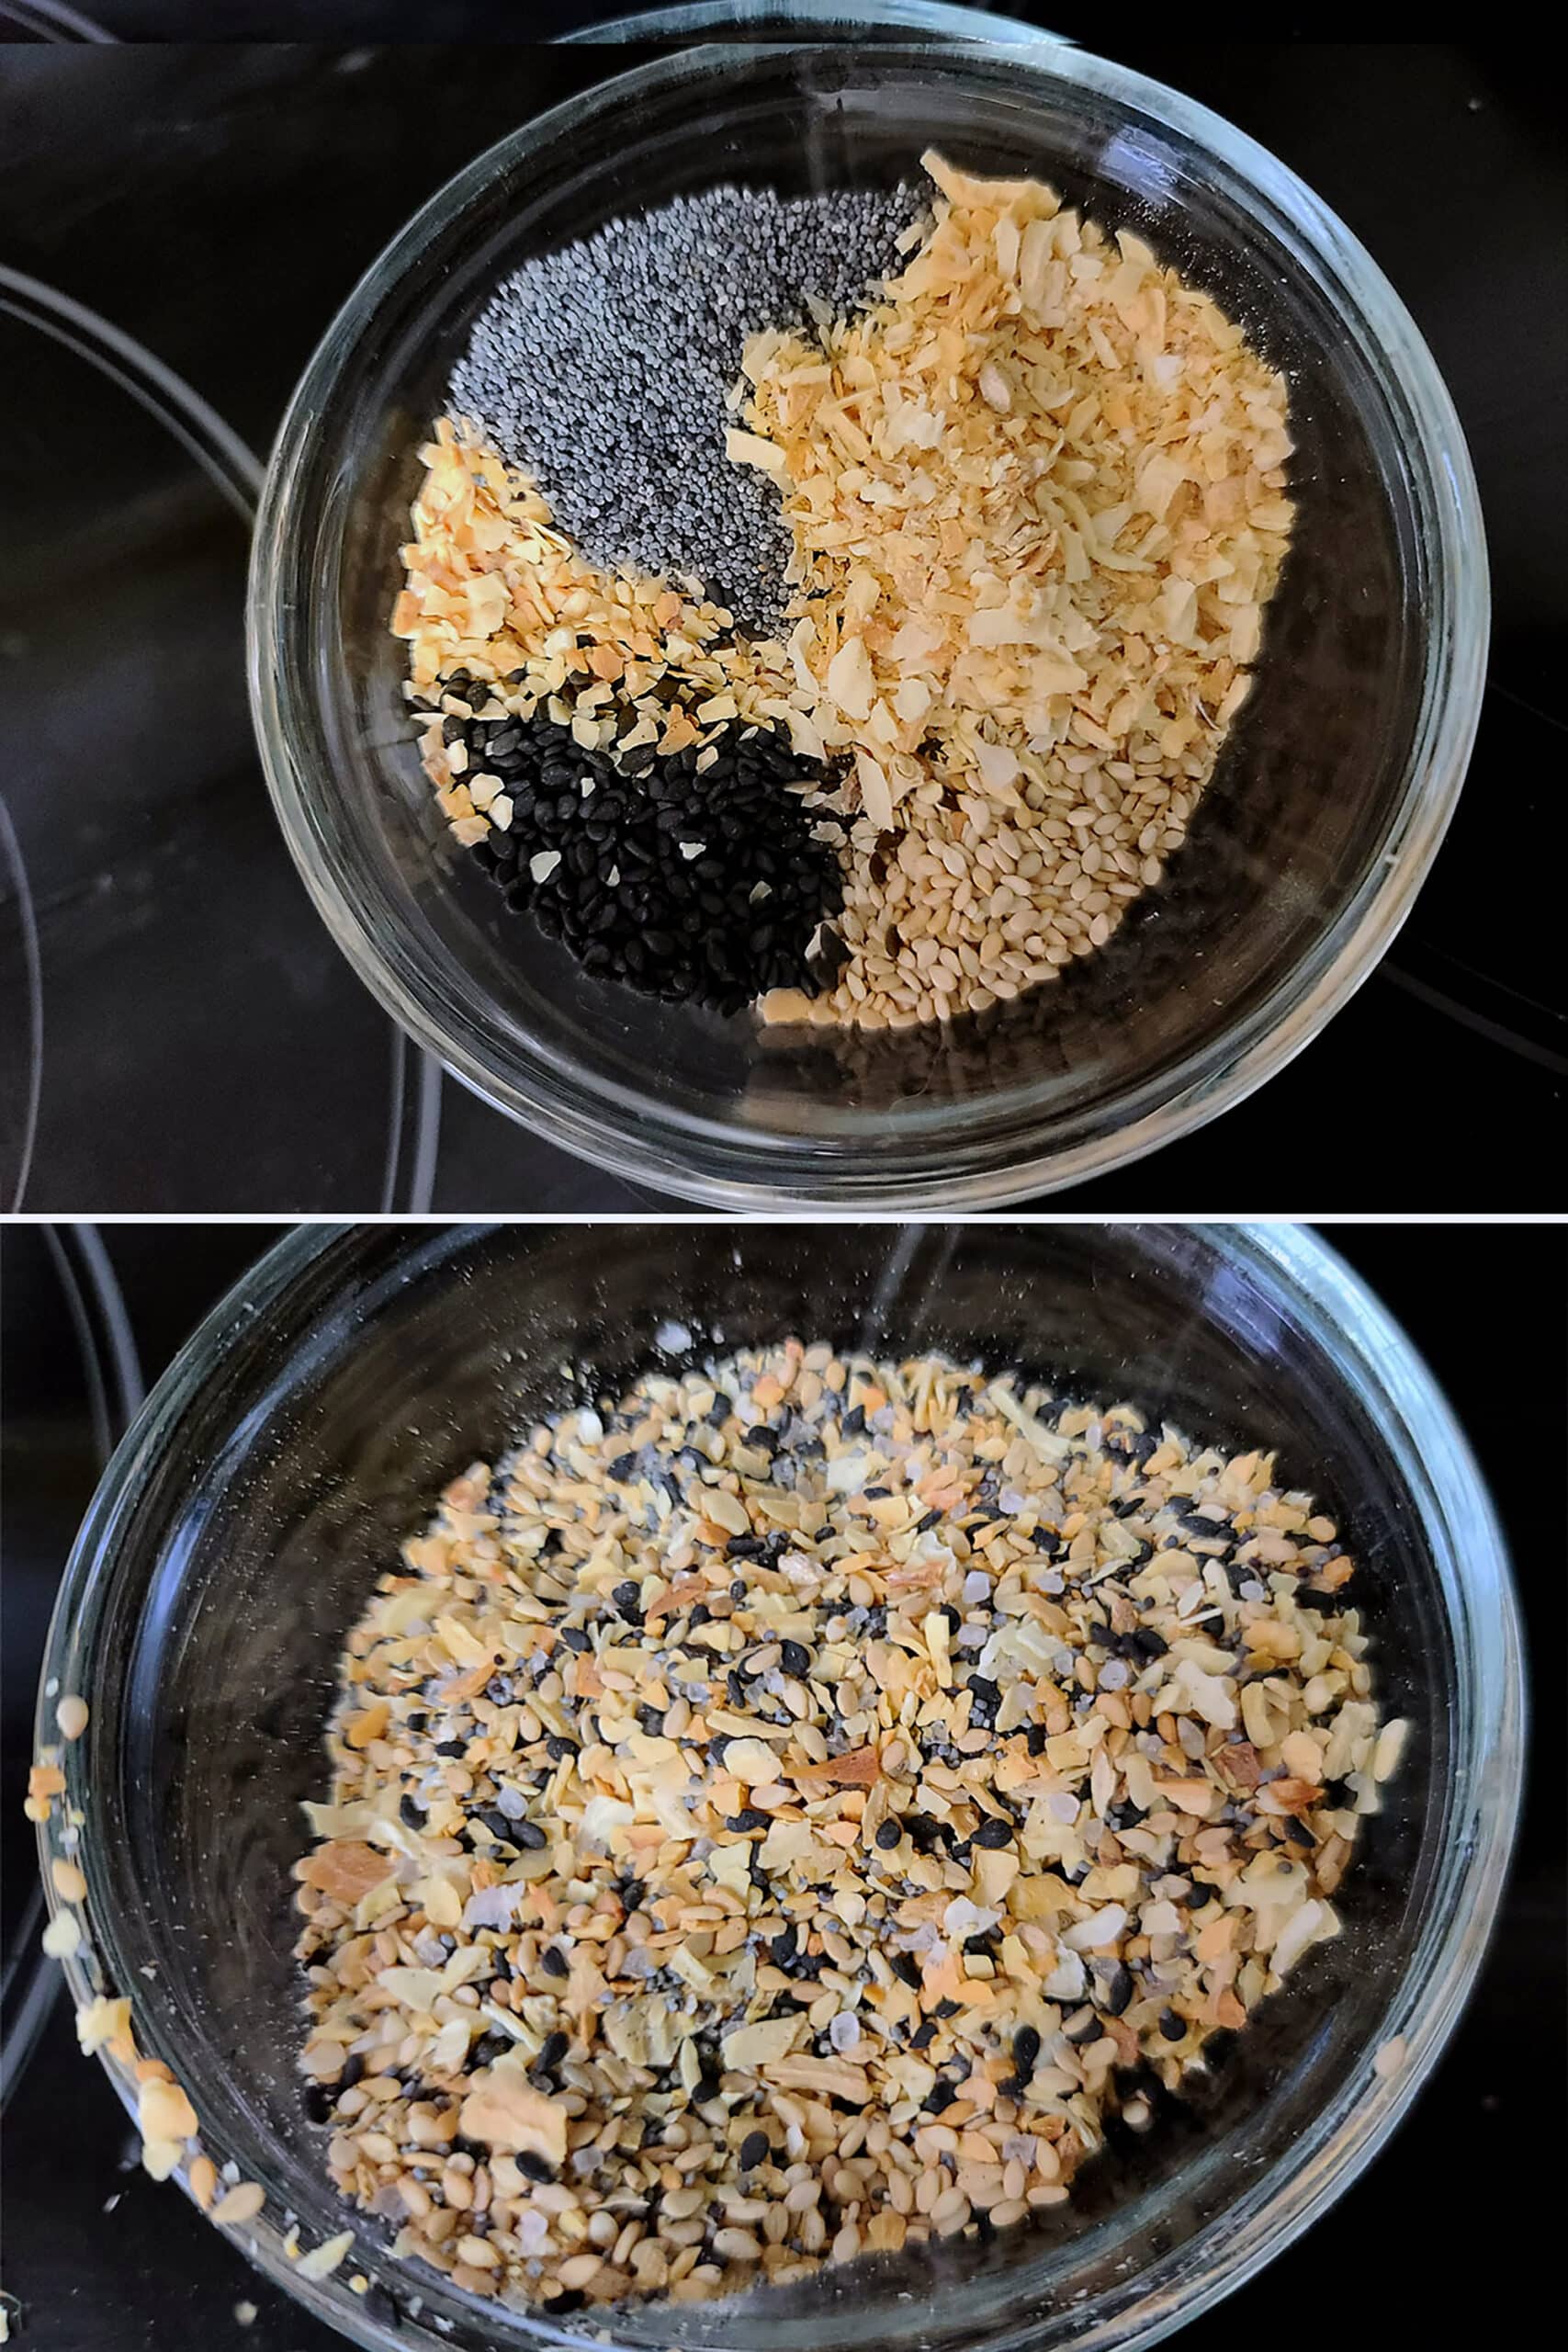 A 2 part image showing homemade everything bagel seasoning being mixed in a small bowl.